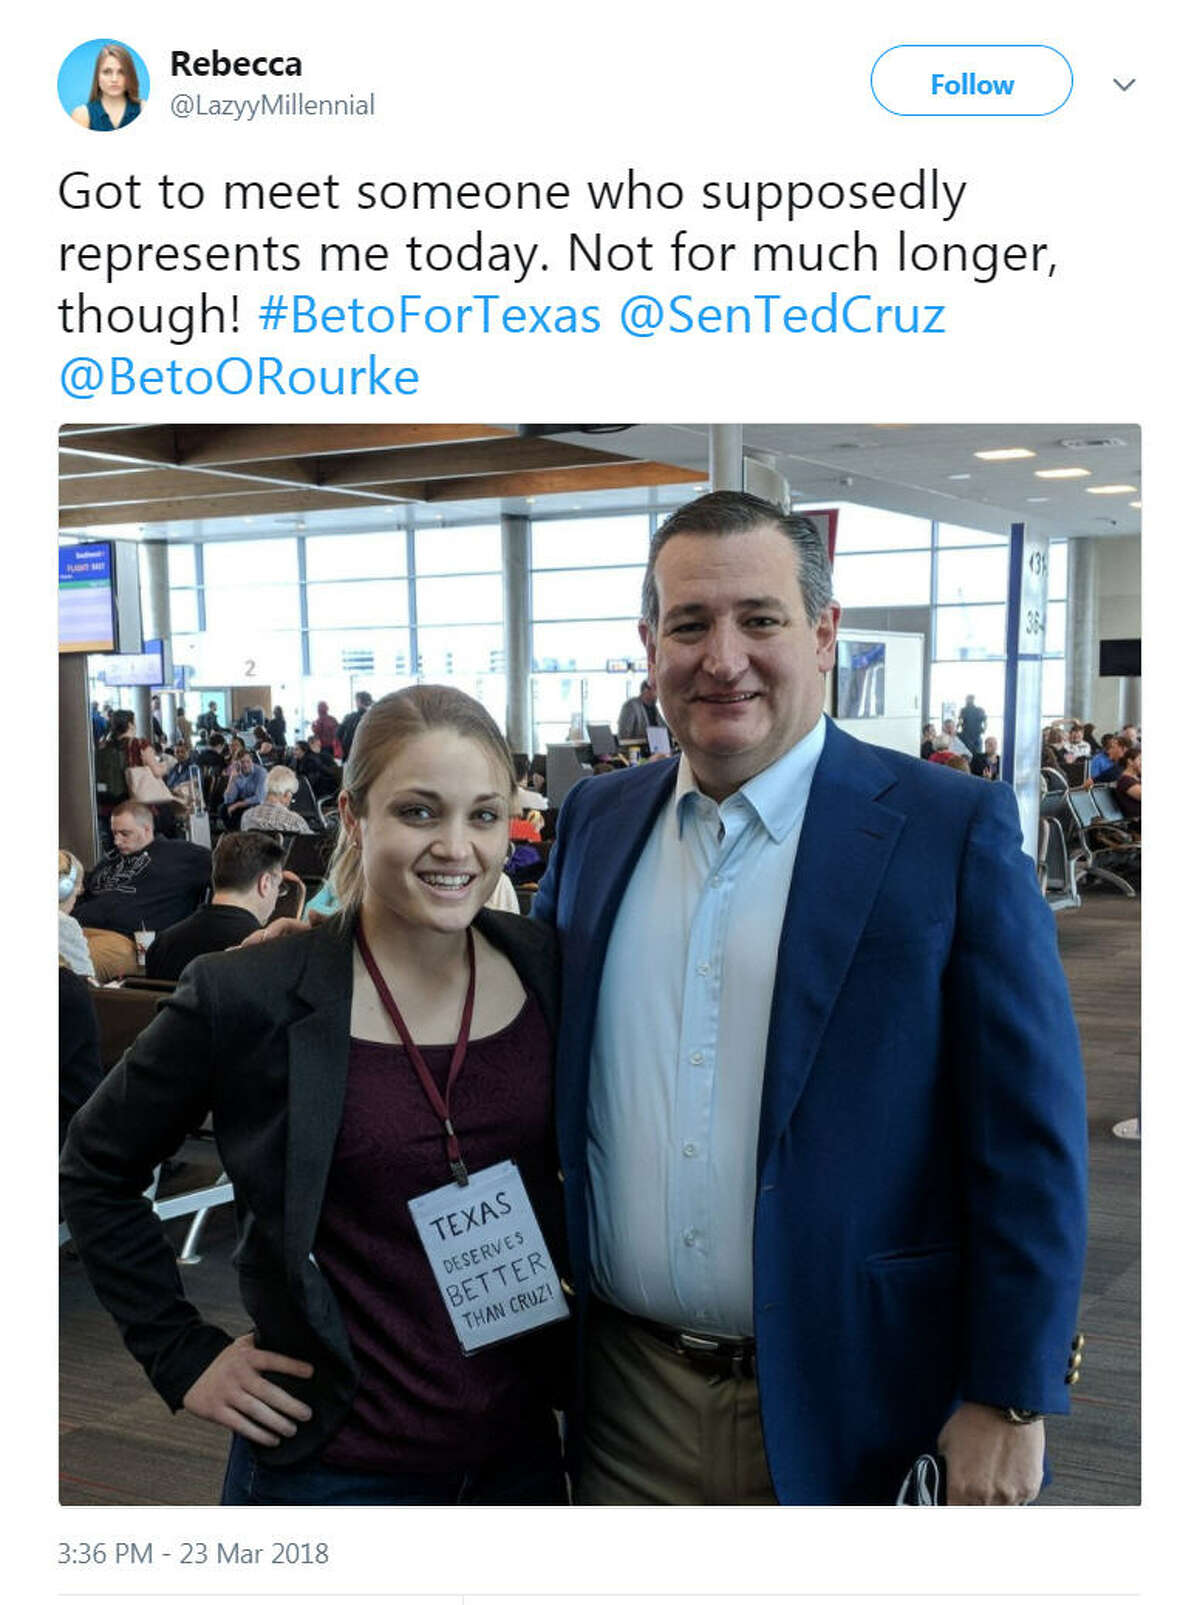 A Texas woman named Rebecca trolled Texas Sen. Ted Cruz by wearing a sign that read "Texas deserves better than Cruz" while taking a photo with him.Image source: TwitterScroll ahead to see people that share an uncanny resemblance to Cruz. 